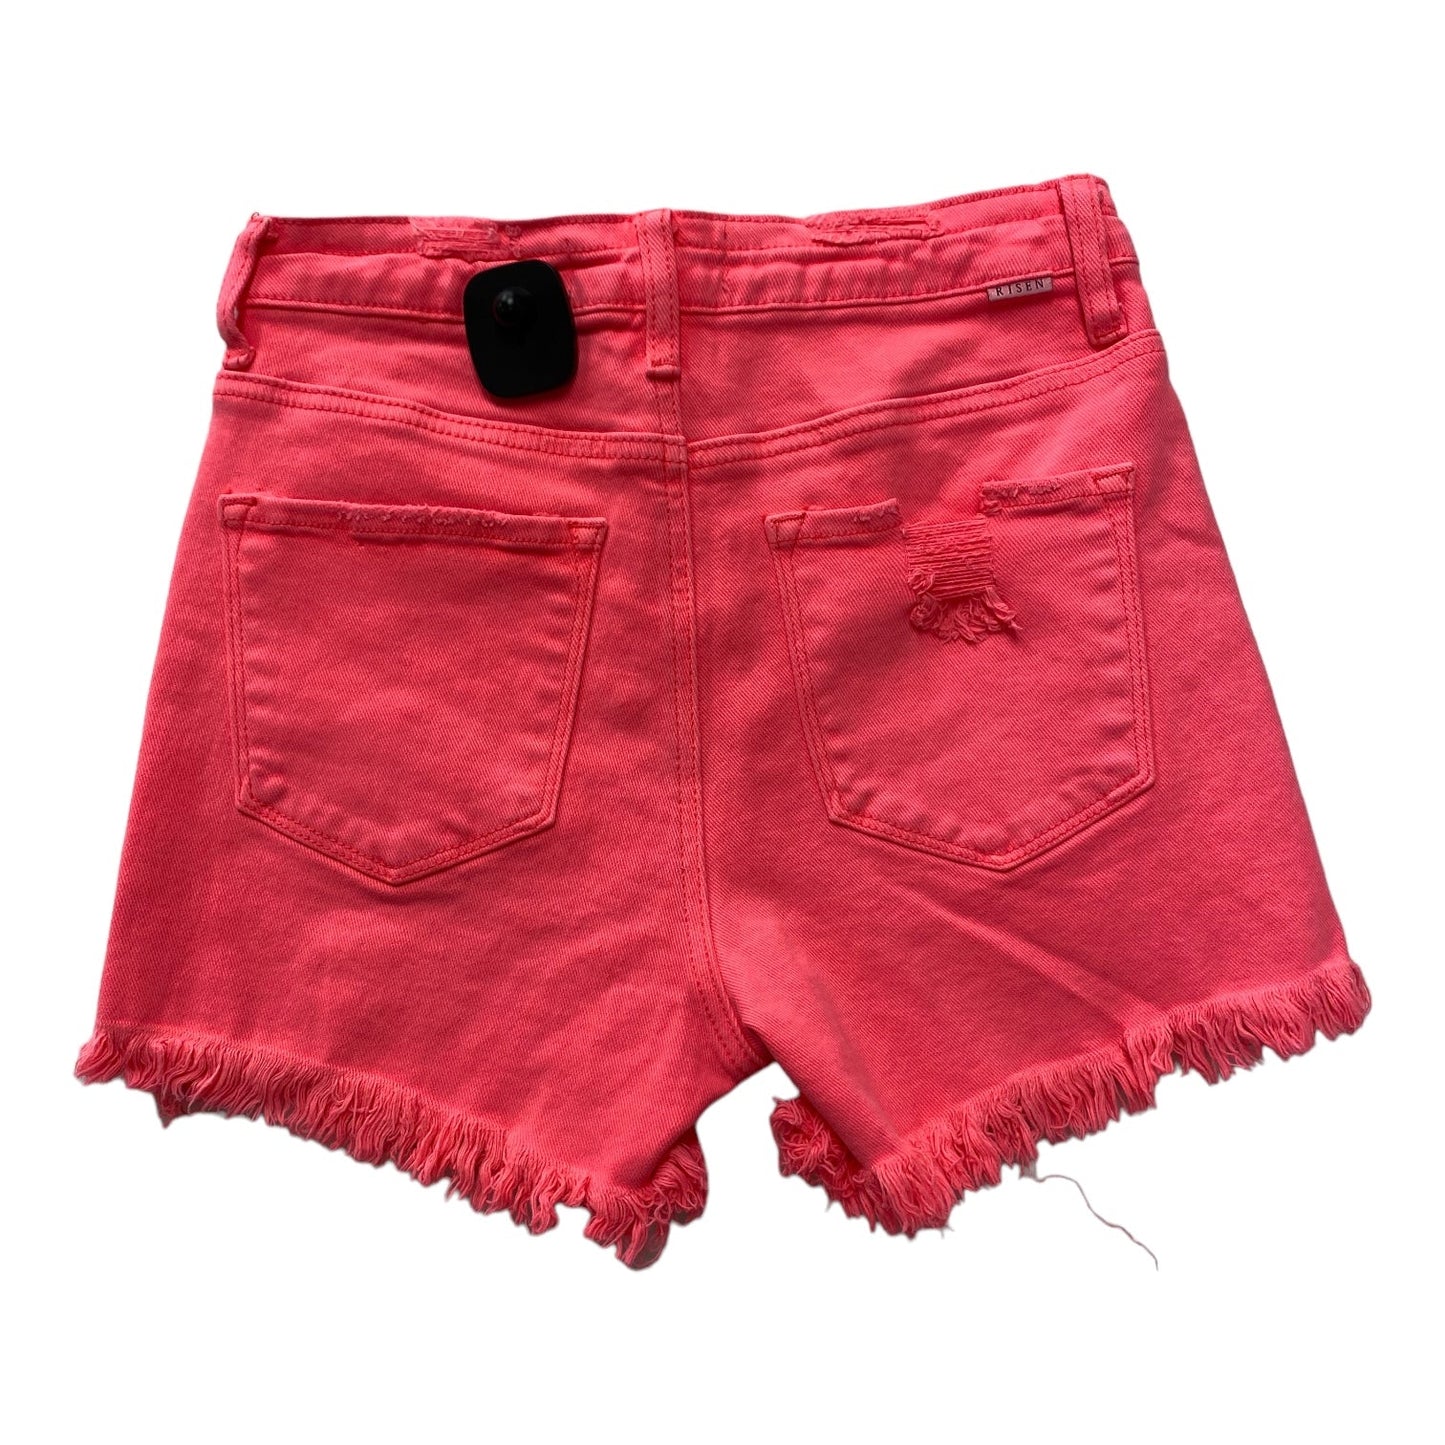 Shorts By Risen  Size: S